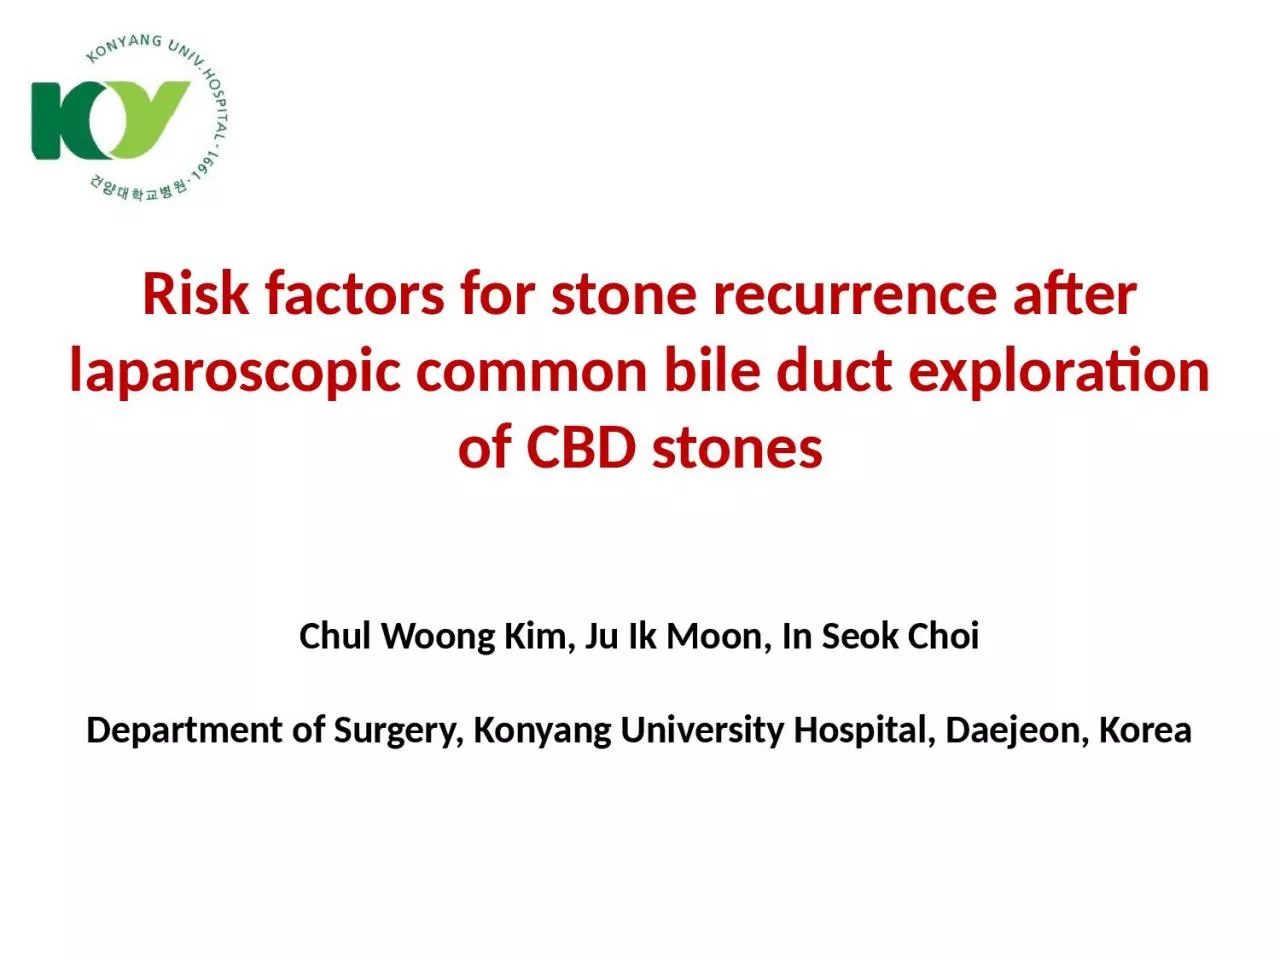 Risk factors for stone recurrence after laparoscopic common bile duct exploration of CBD